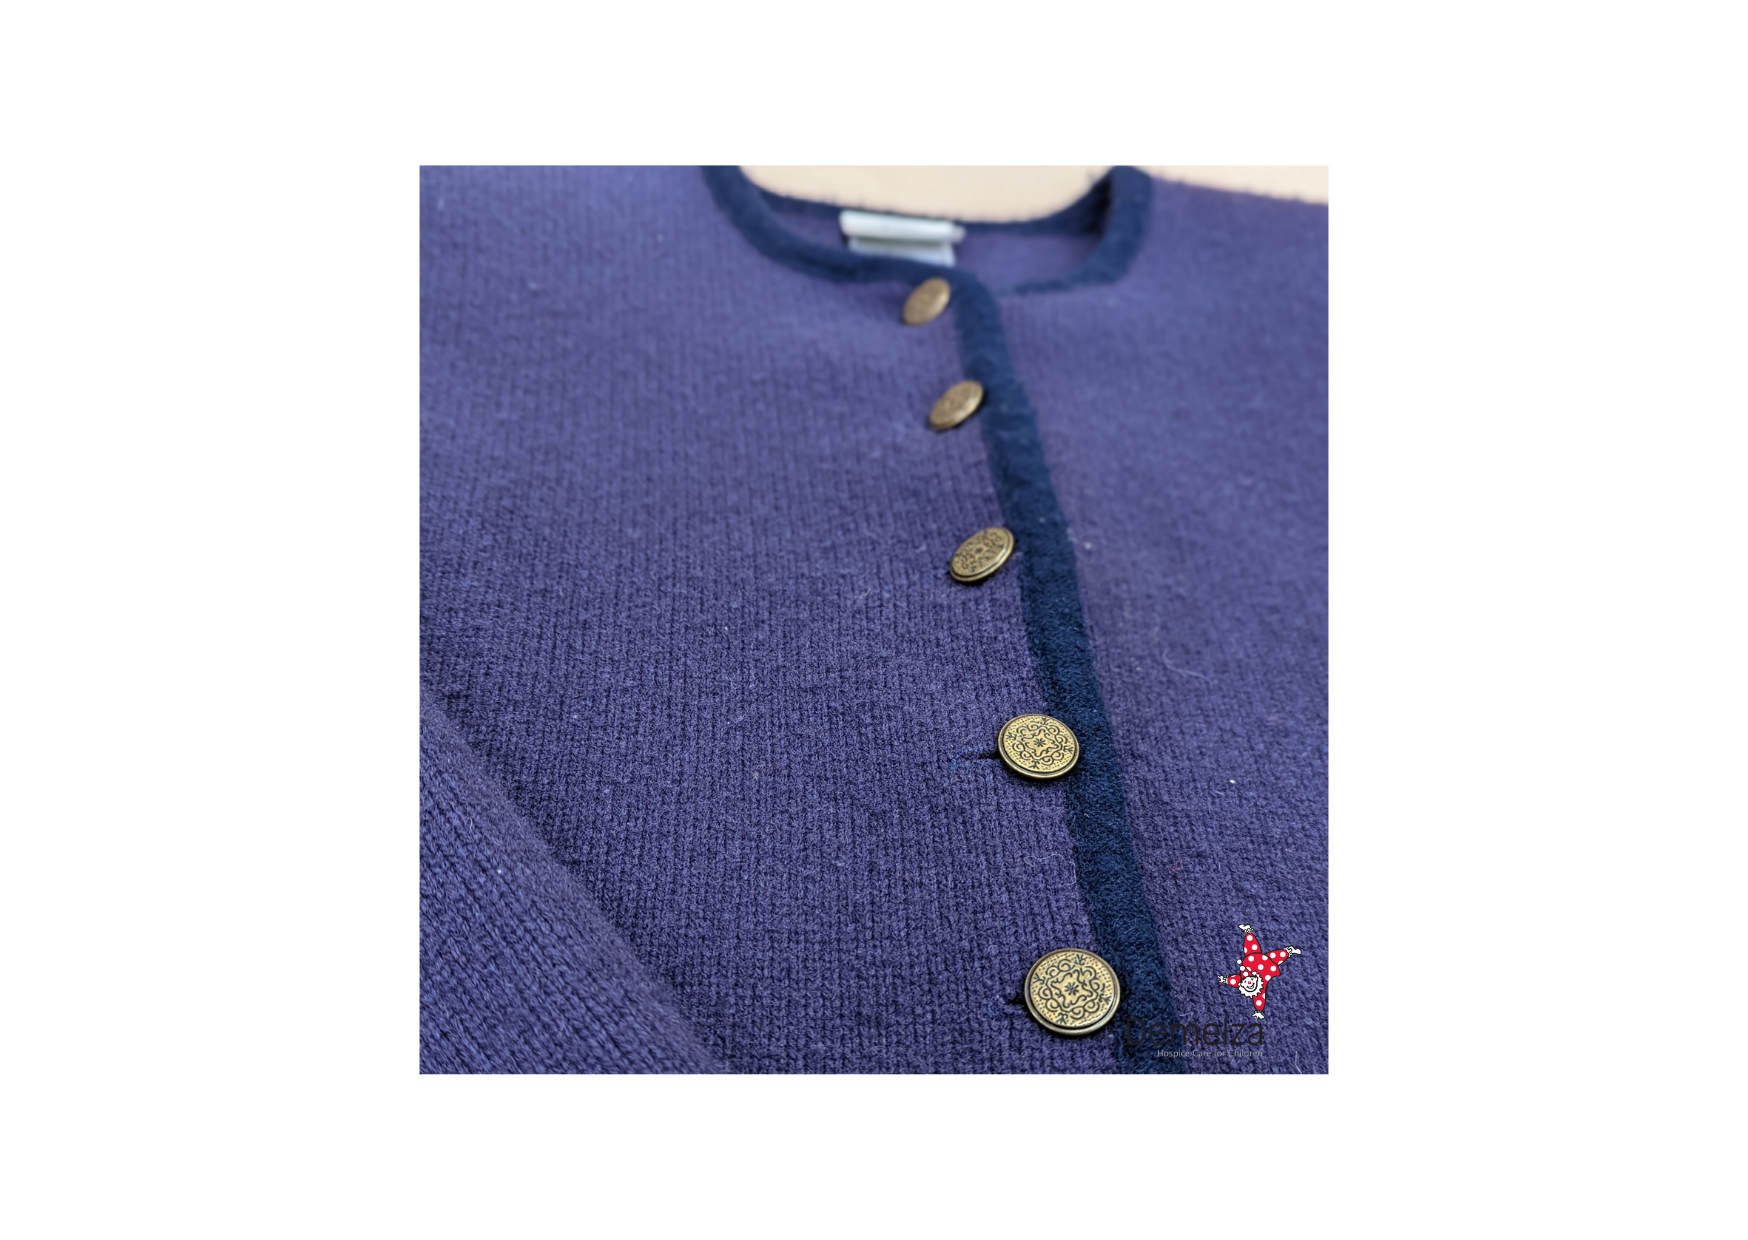 Purple Laura Ashley Cardigan with gold buttons